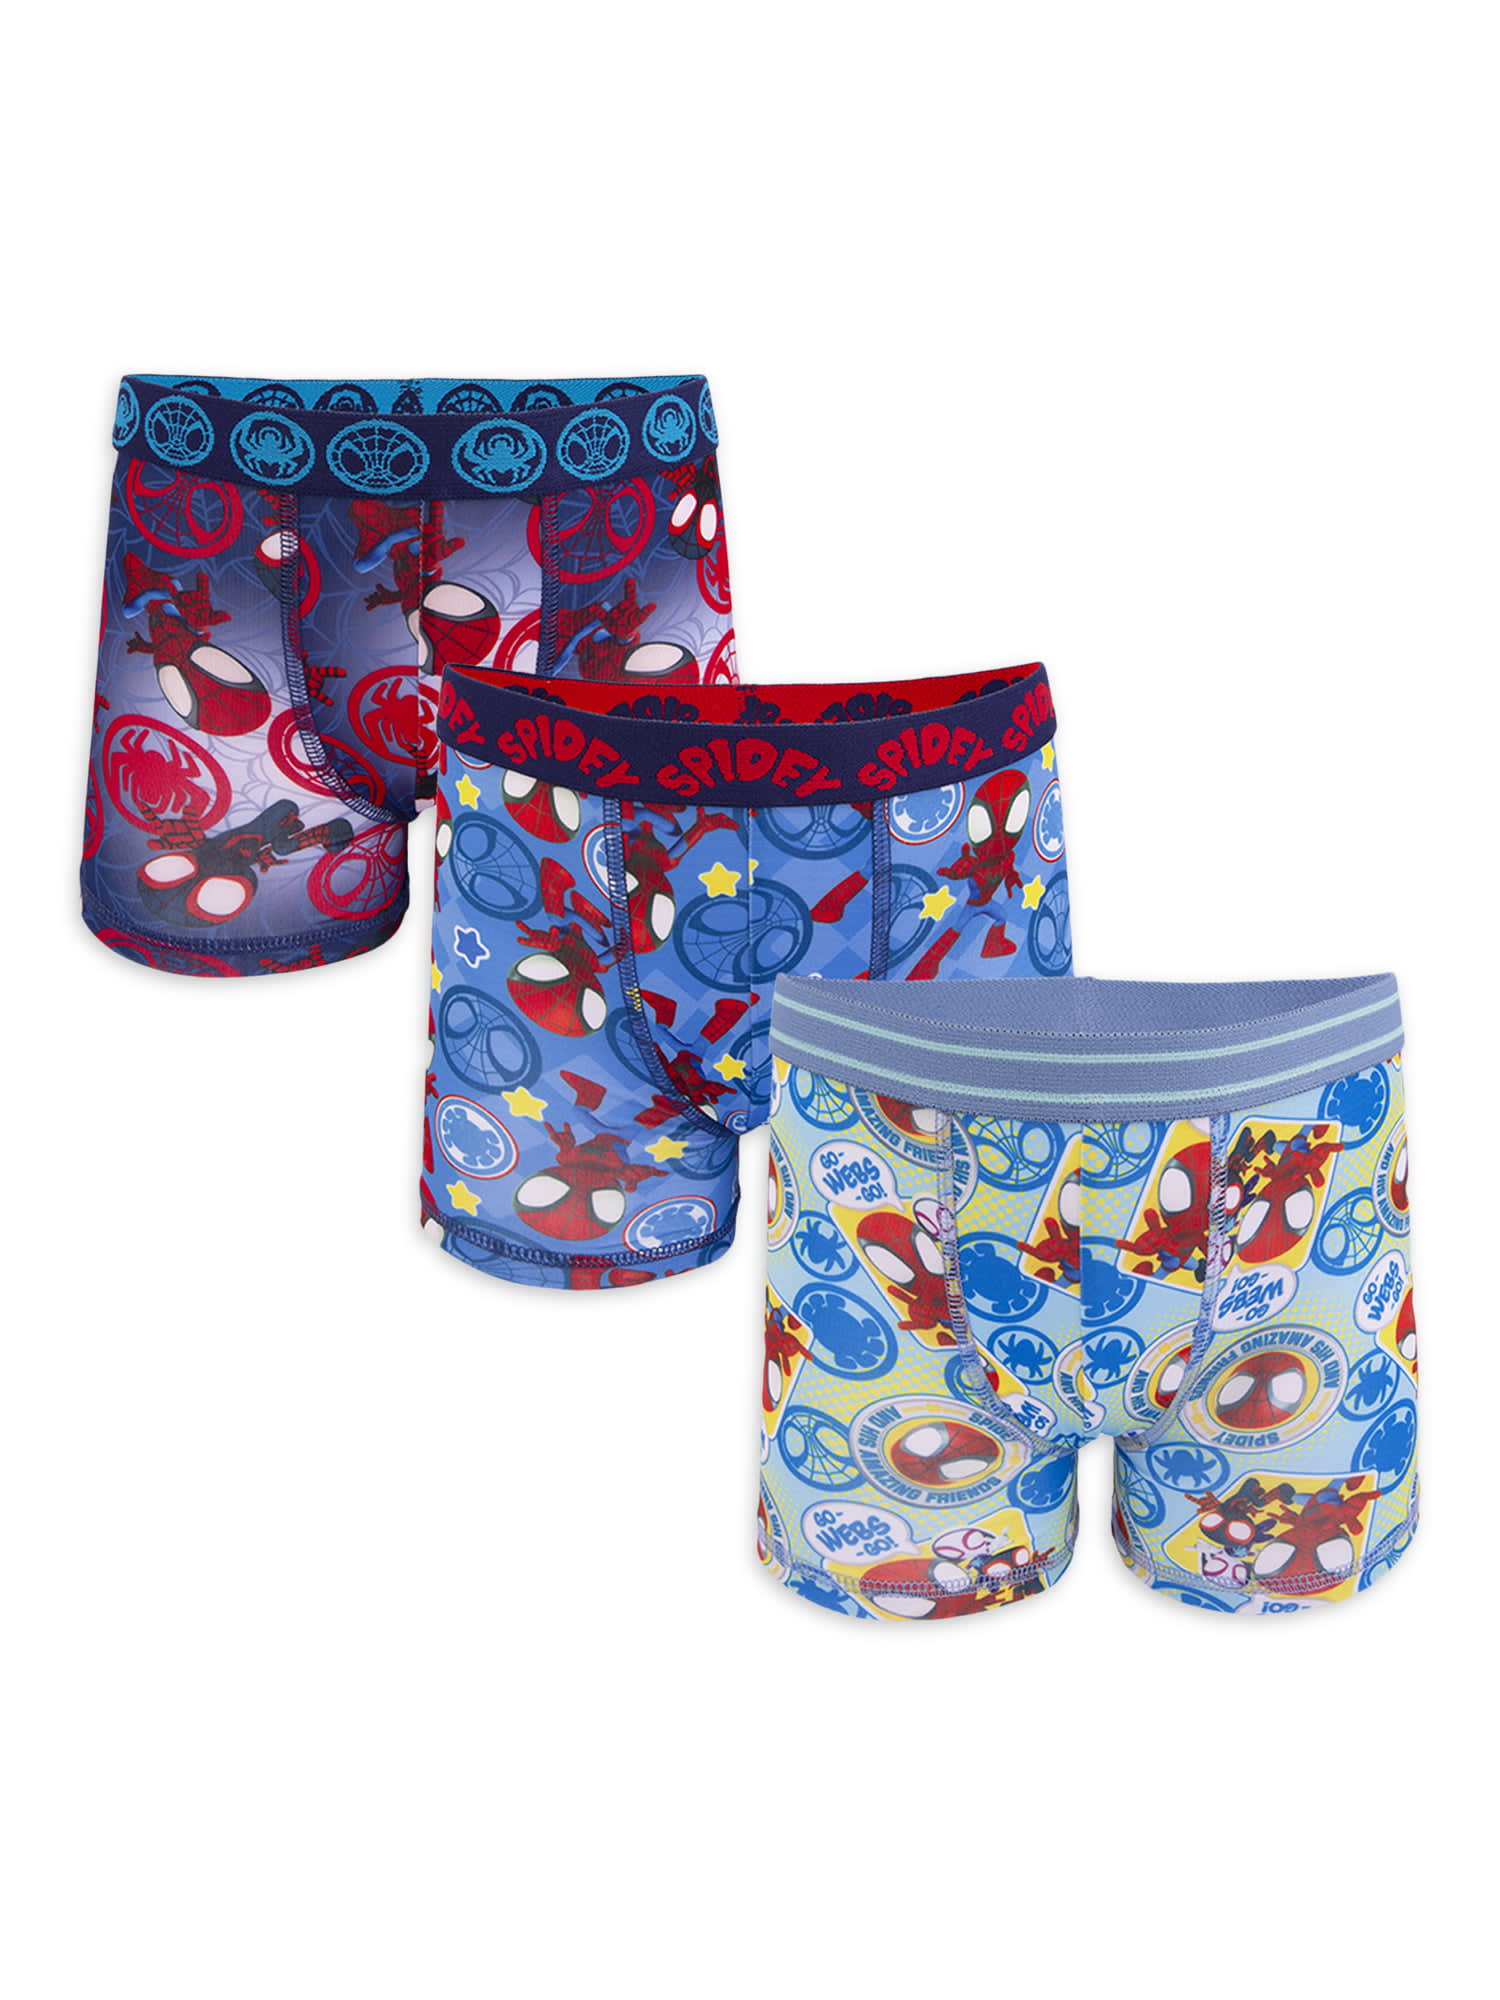 Spiderman Toddler Boys Boxer Briefs, 3 Pack, Sizes 2T-4T - DroneUp Delivery